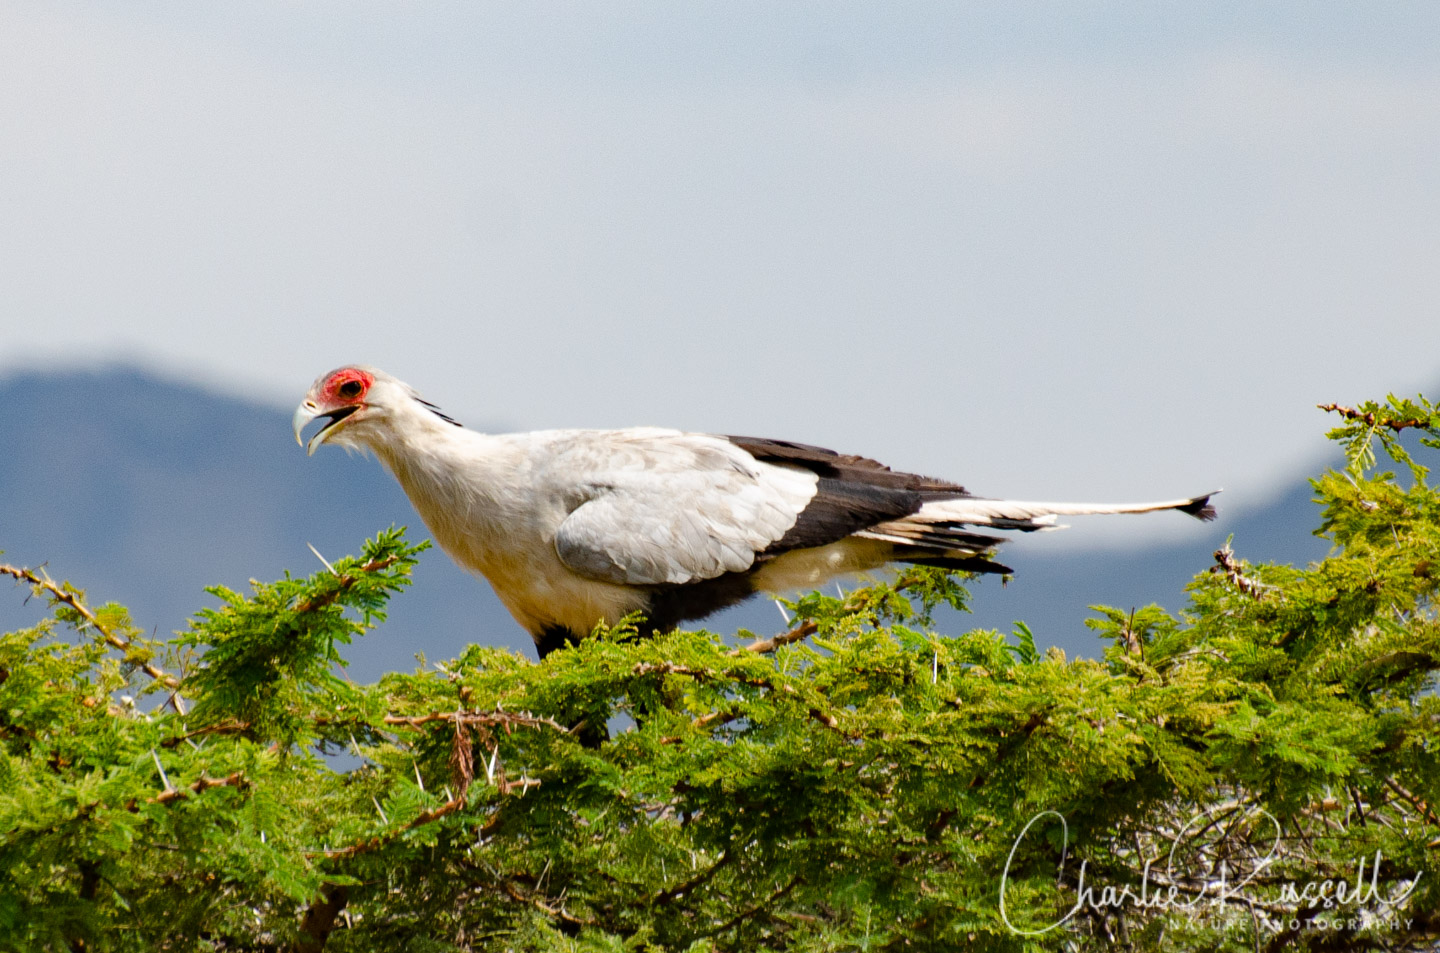 Secretarybird, Sagittarius serpentarius. In a tree top, eating a snake (which you can't see)